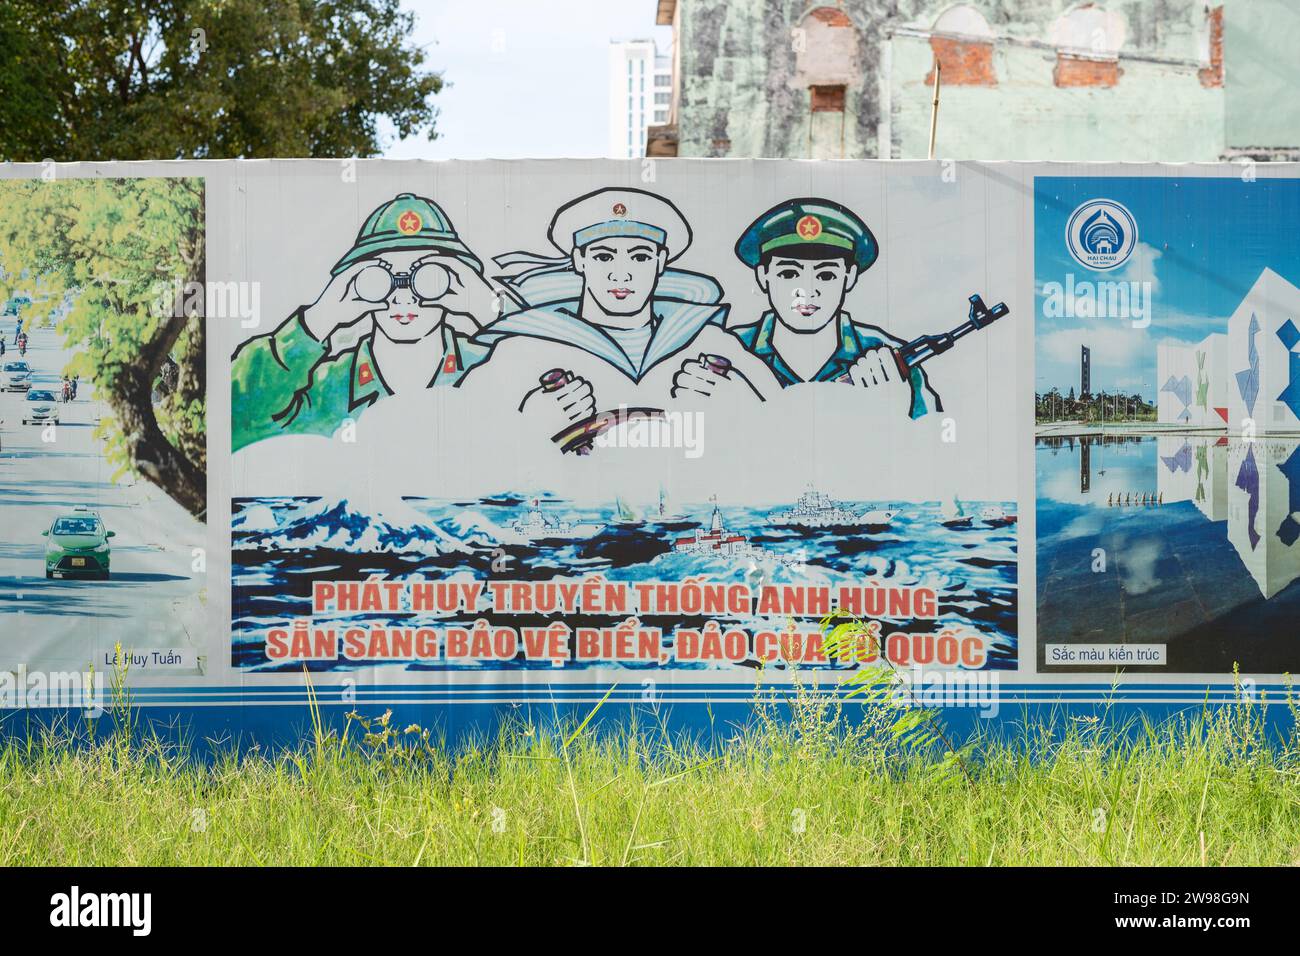 Da Nang, Vietnam - October 7, 2023: a poster "Keep up the heroic tradition. Ready to protect the sea and islands of the nation" on construction fence. Stock Photo